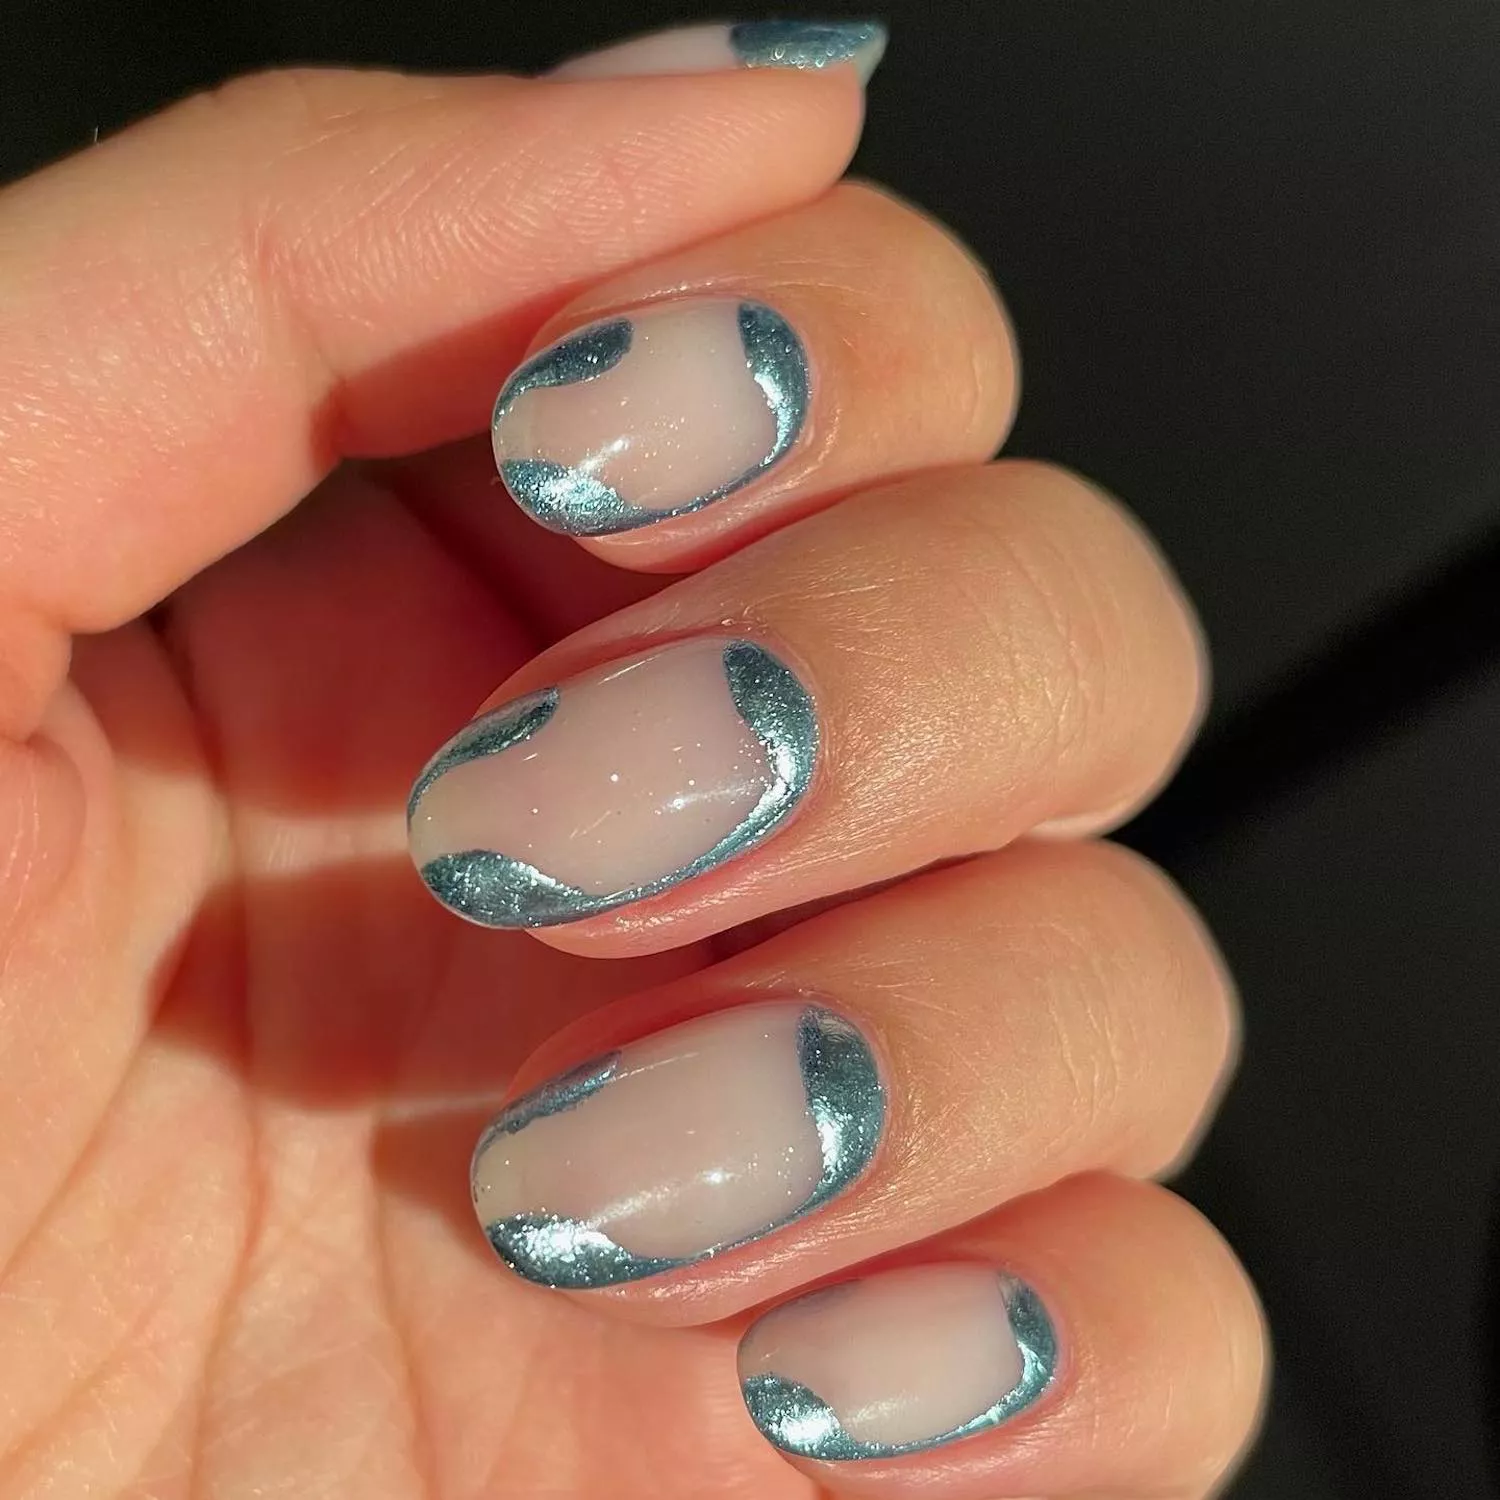 Manicure with sheer center and chrome foil borders